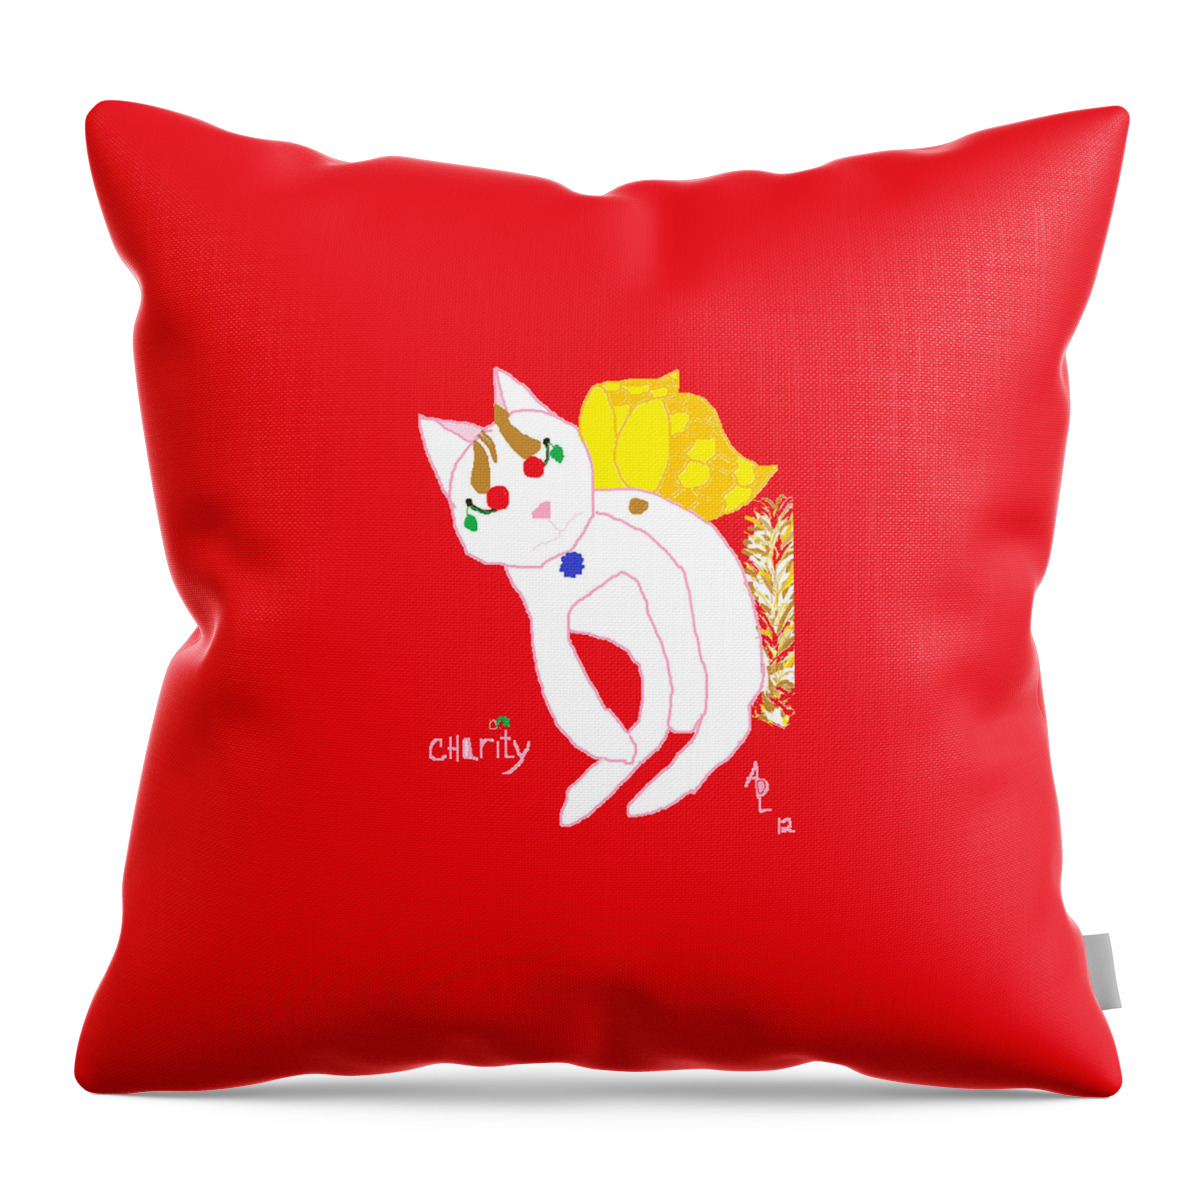 Cherries Jubilee Throw Pillow featuring the painting Cherries Jubilee by Anita Dale Livaditis